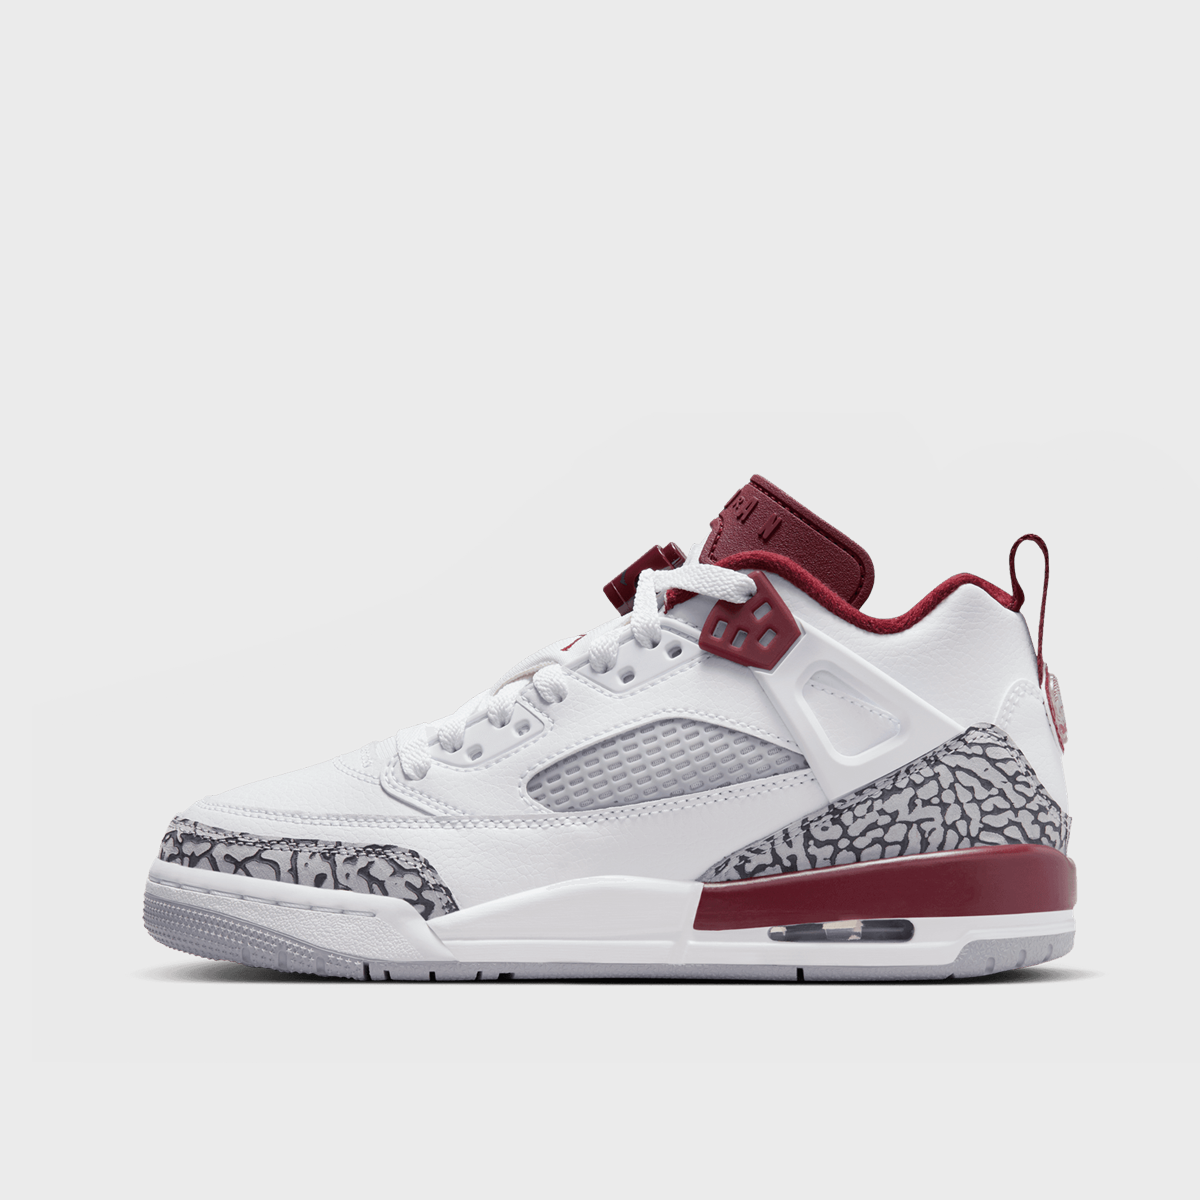 Spizike Low (GS), JORDAN, Footwear, white/team red/wolf grey/anthracite, taille: 36